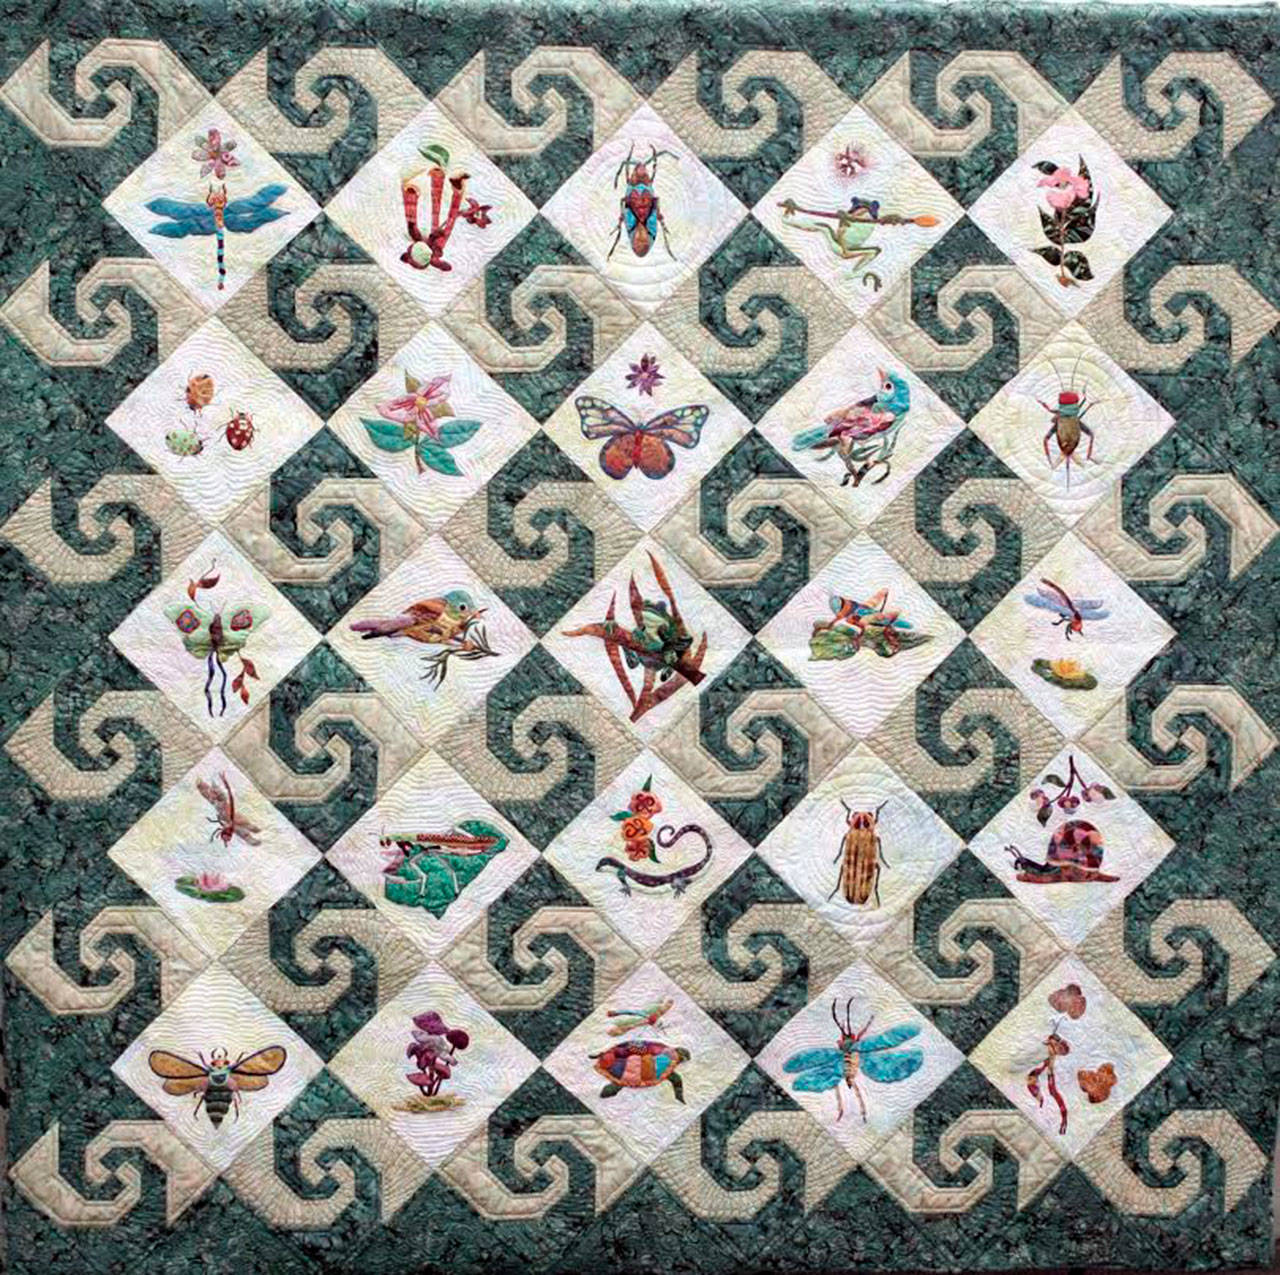 Raffle tickets are on sale now for a quilt honoring the late Muriel “Kitty” Niles. The raffle drawing will be at the Sunbonnet Sue Quilt Club’s annual quilt show in July.